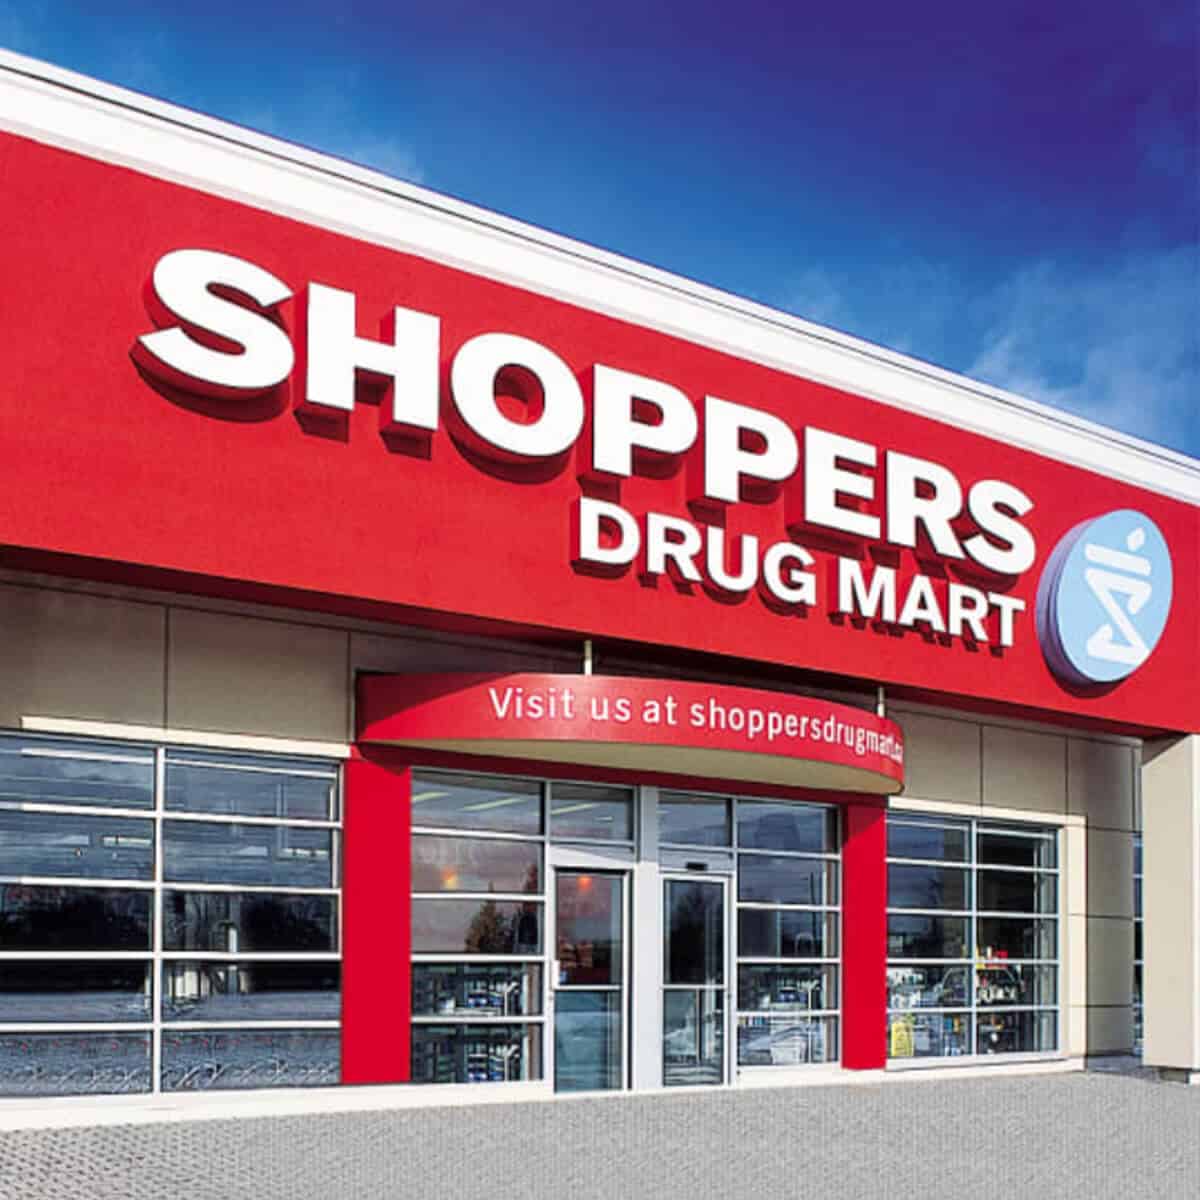 Shoppers Drug Mart Toronto : Locations, Hours & More